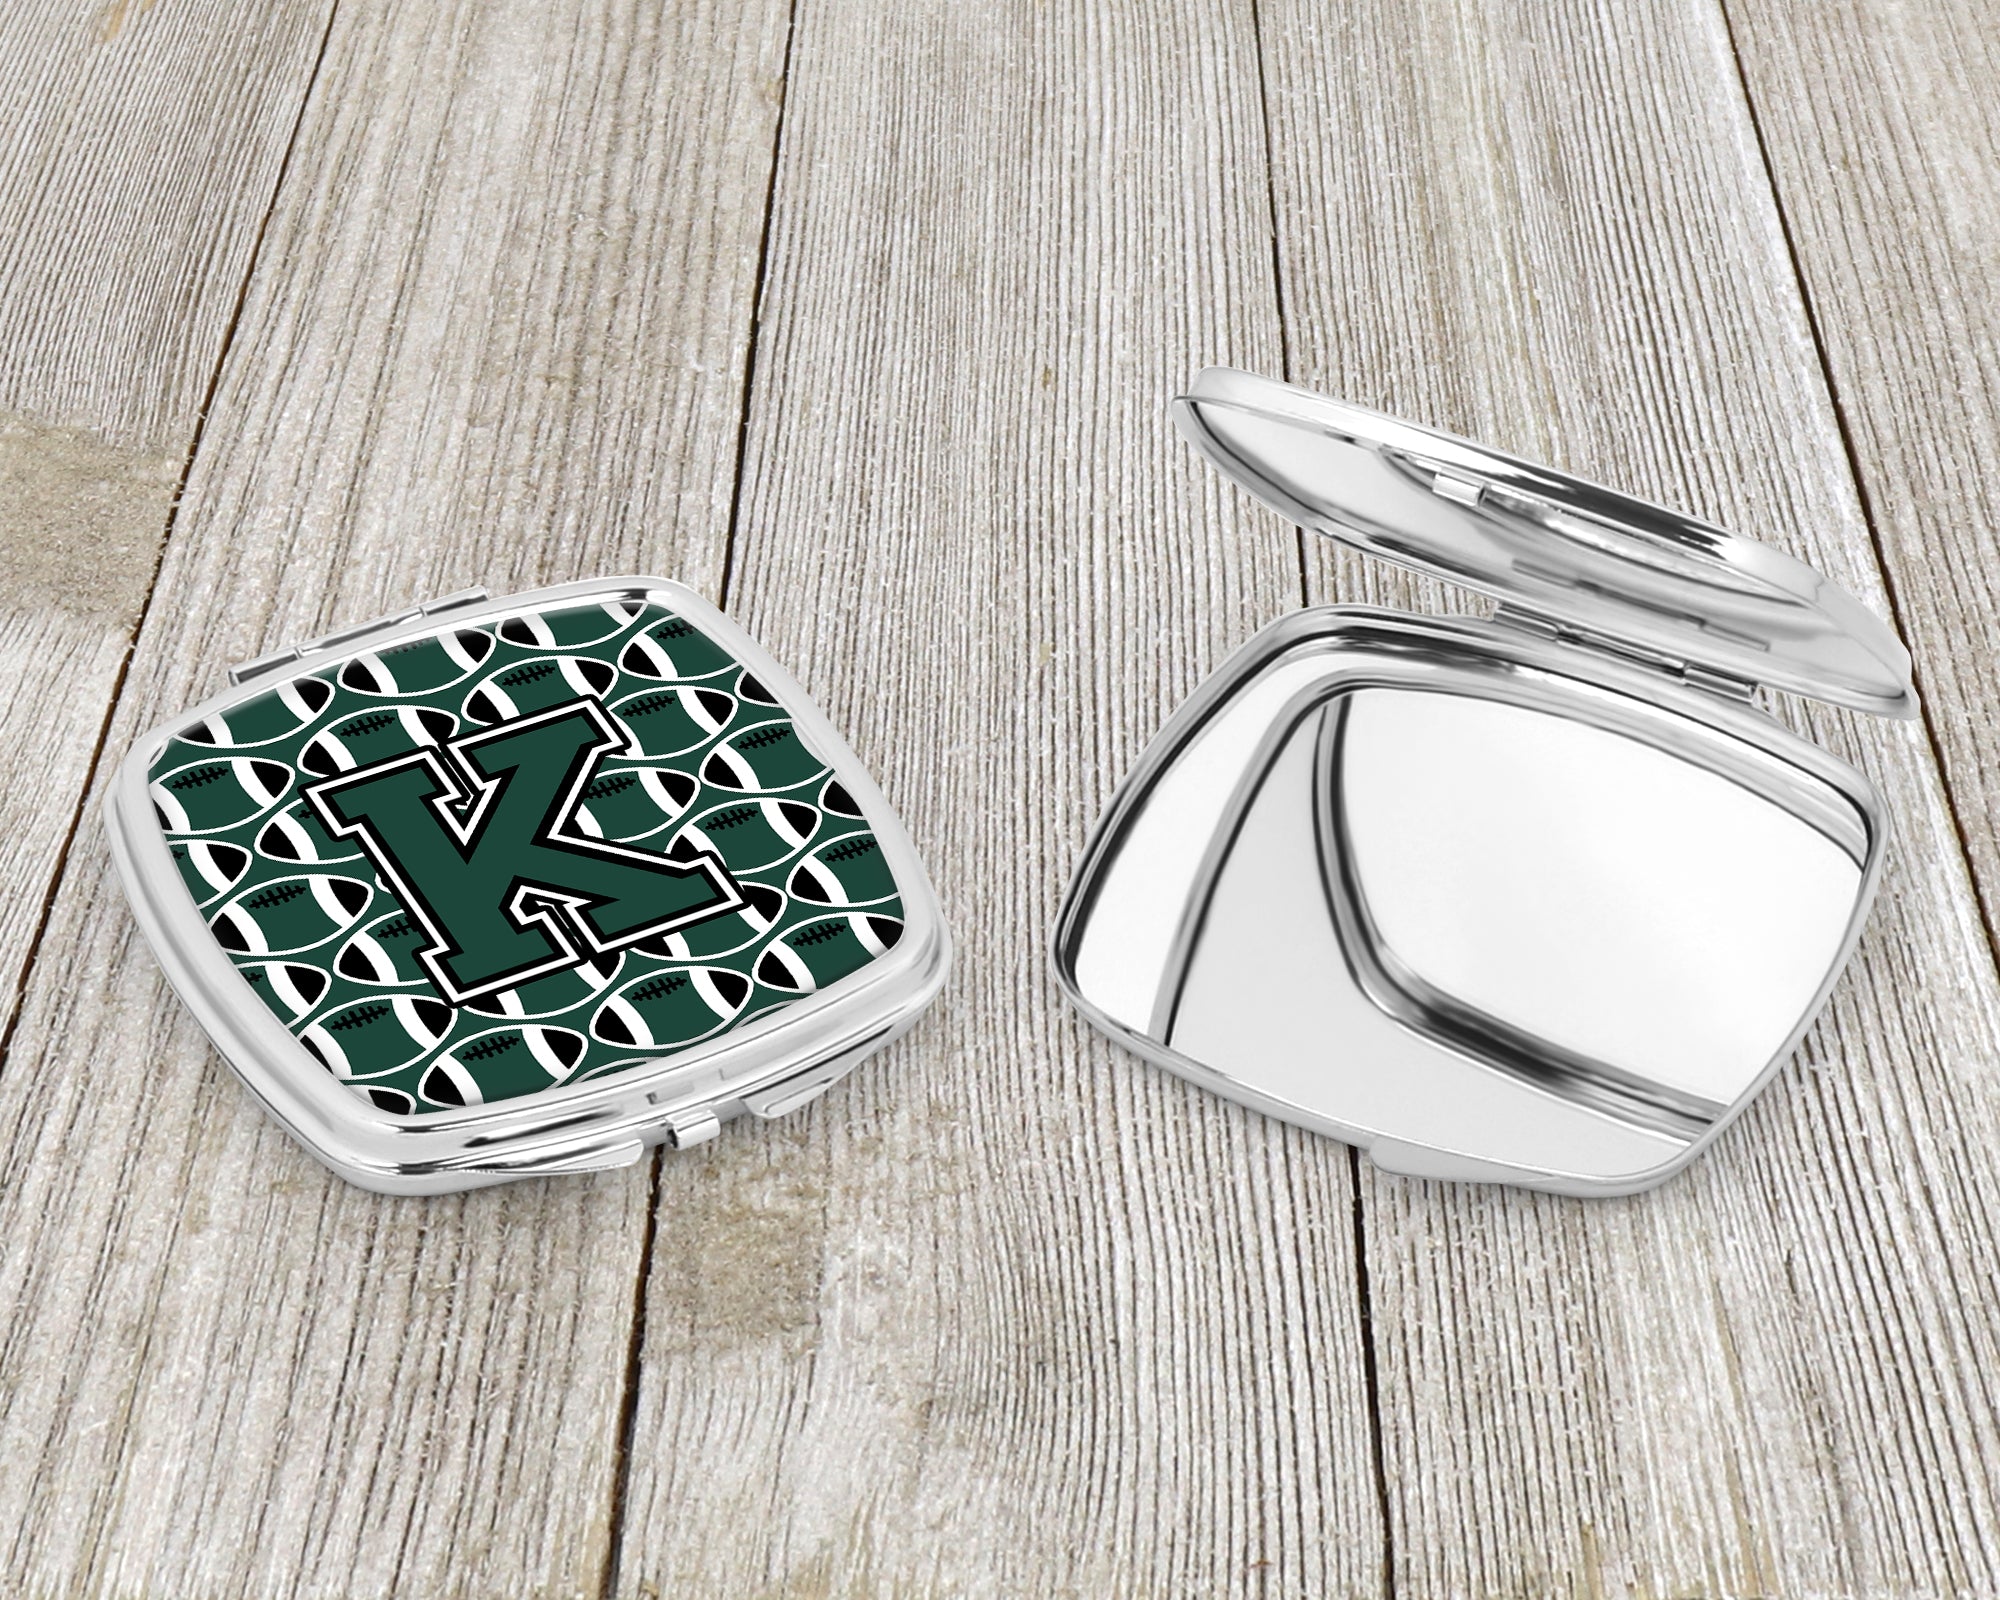 Letter K Football Green and White Compact Mirror CJ1071-KSCM  the-store.com.